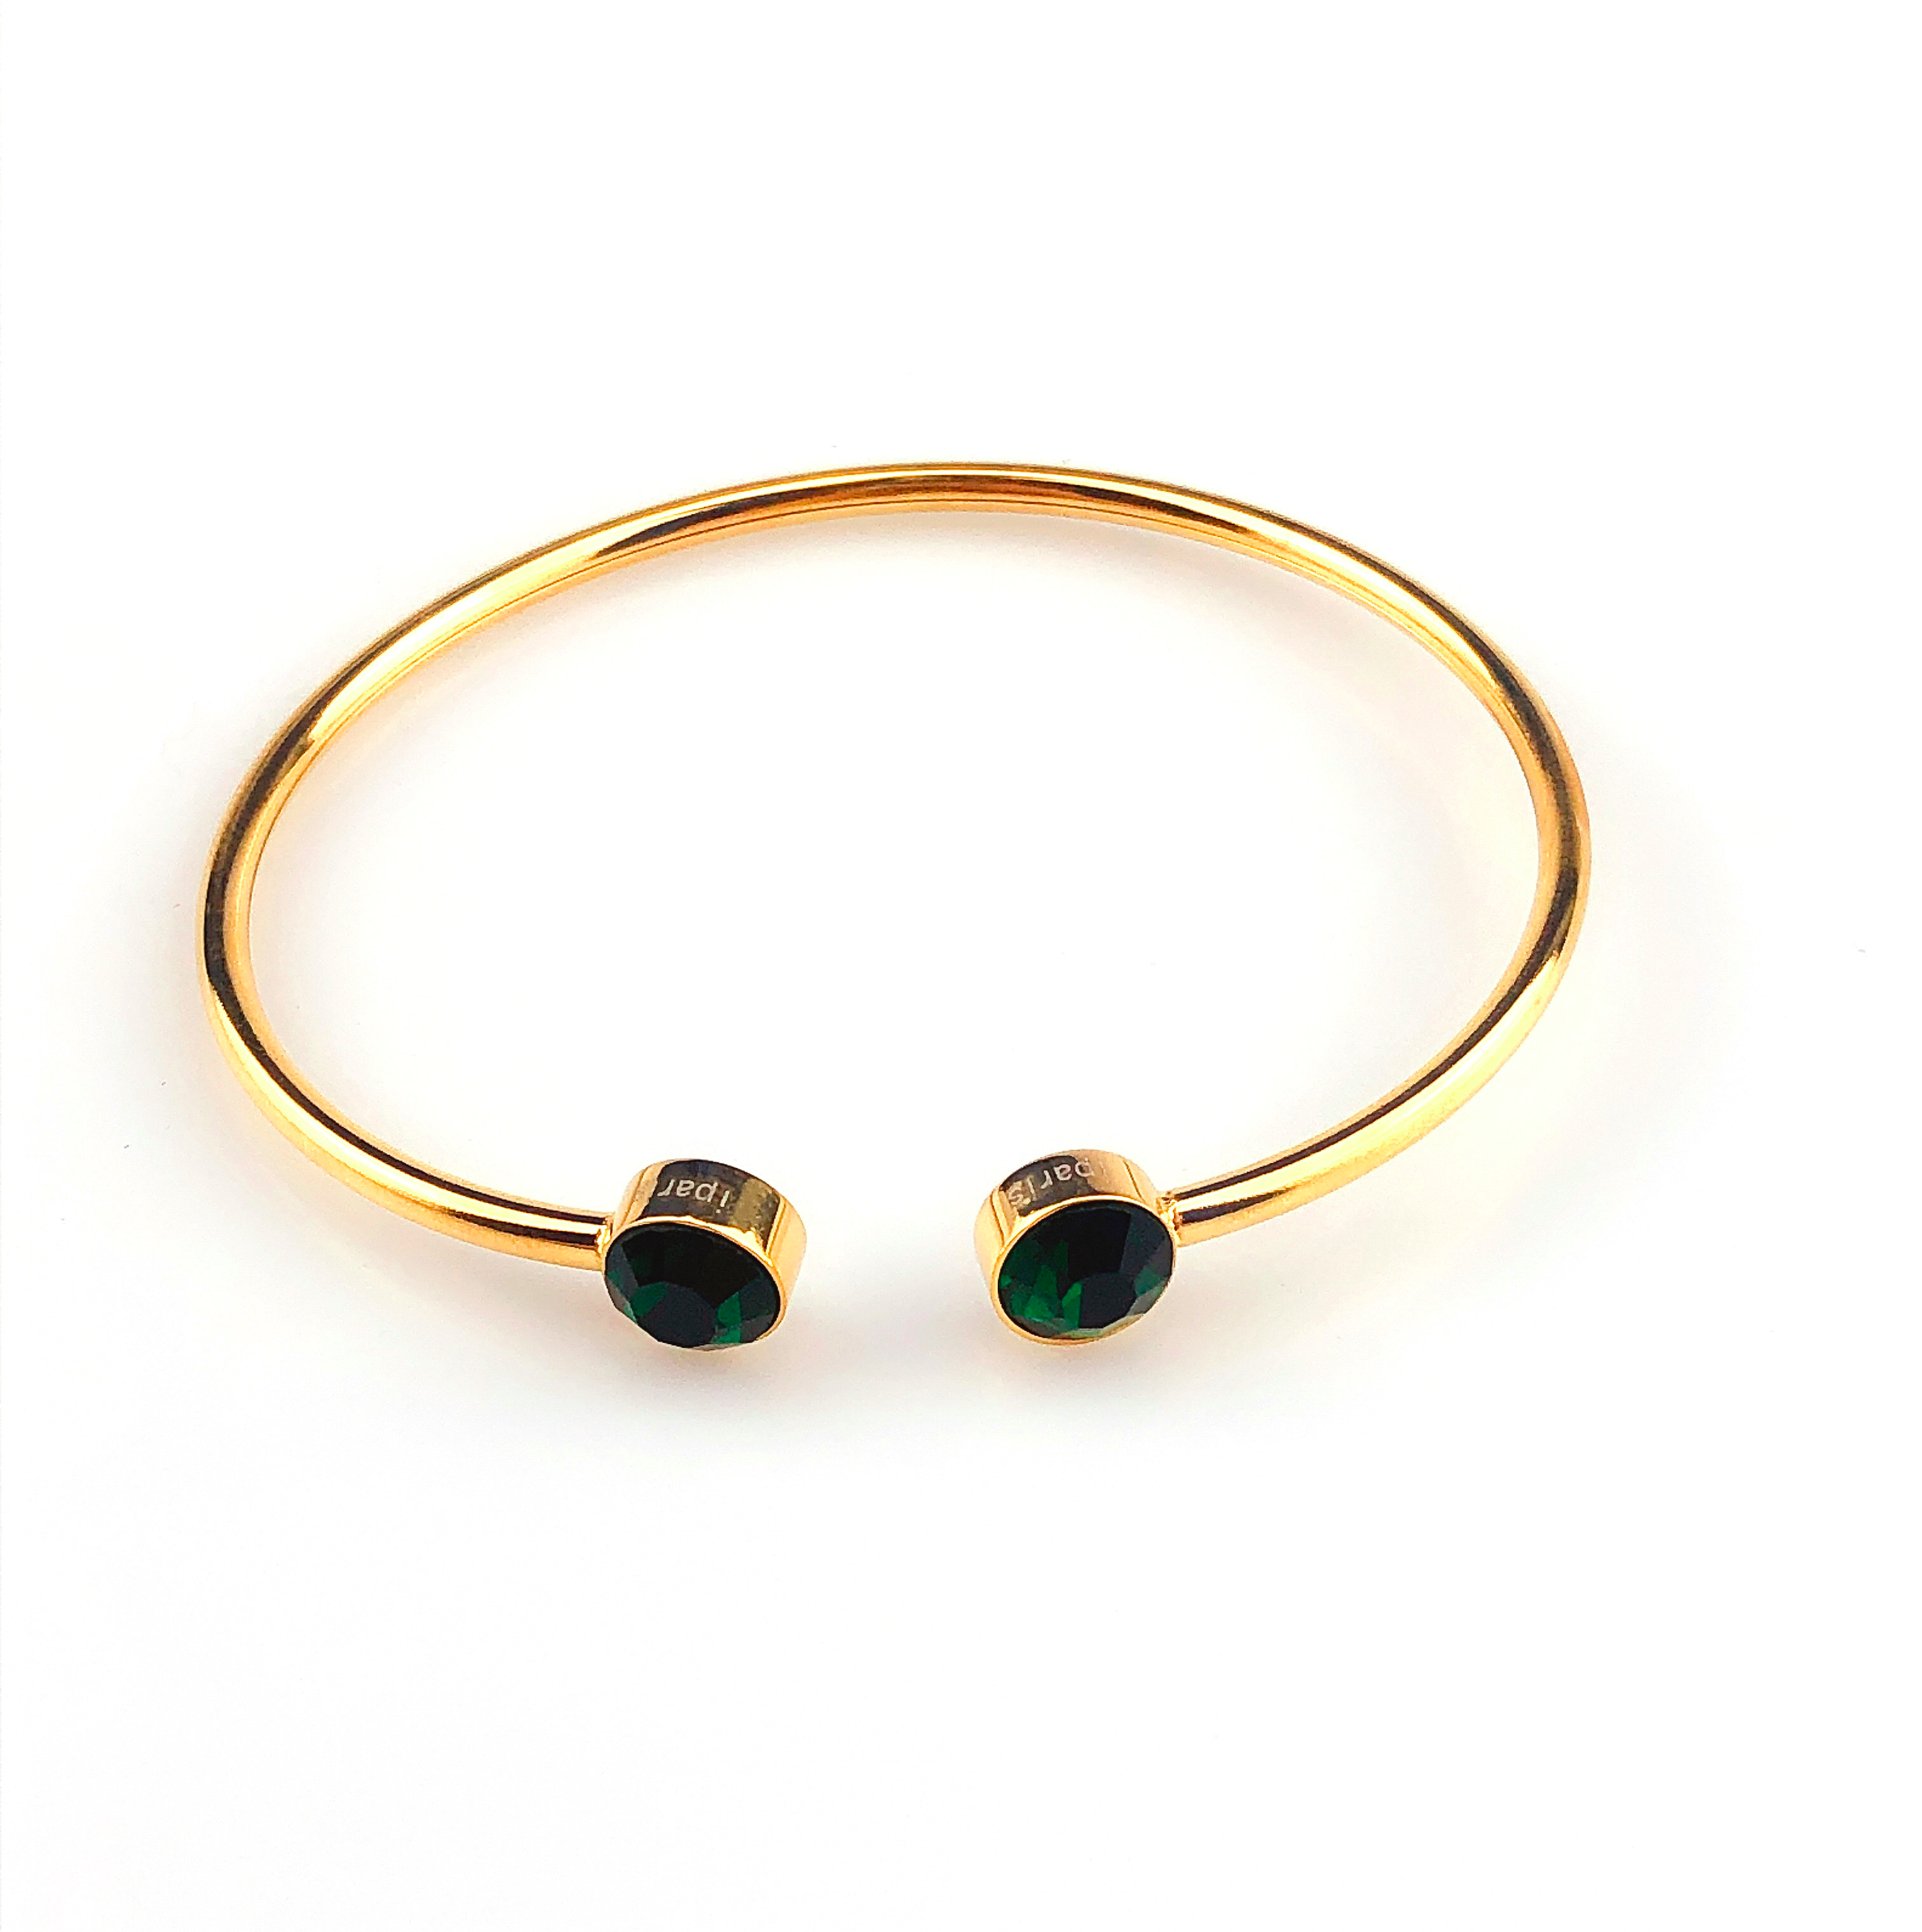 Bonjour Jewelers 1 Ct Round Emerald Stackable Bangle Bracelet In 14k Gold Pack Of 3.